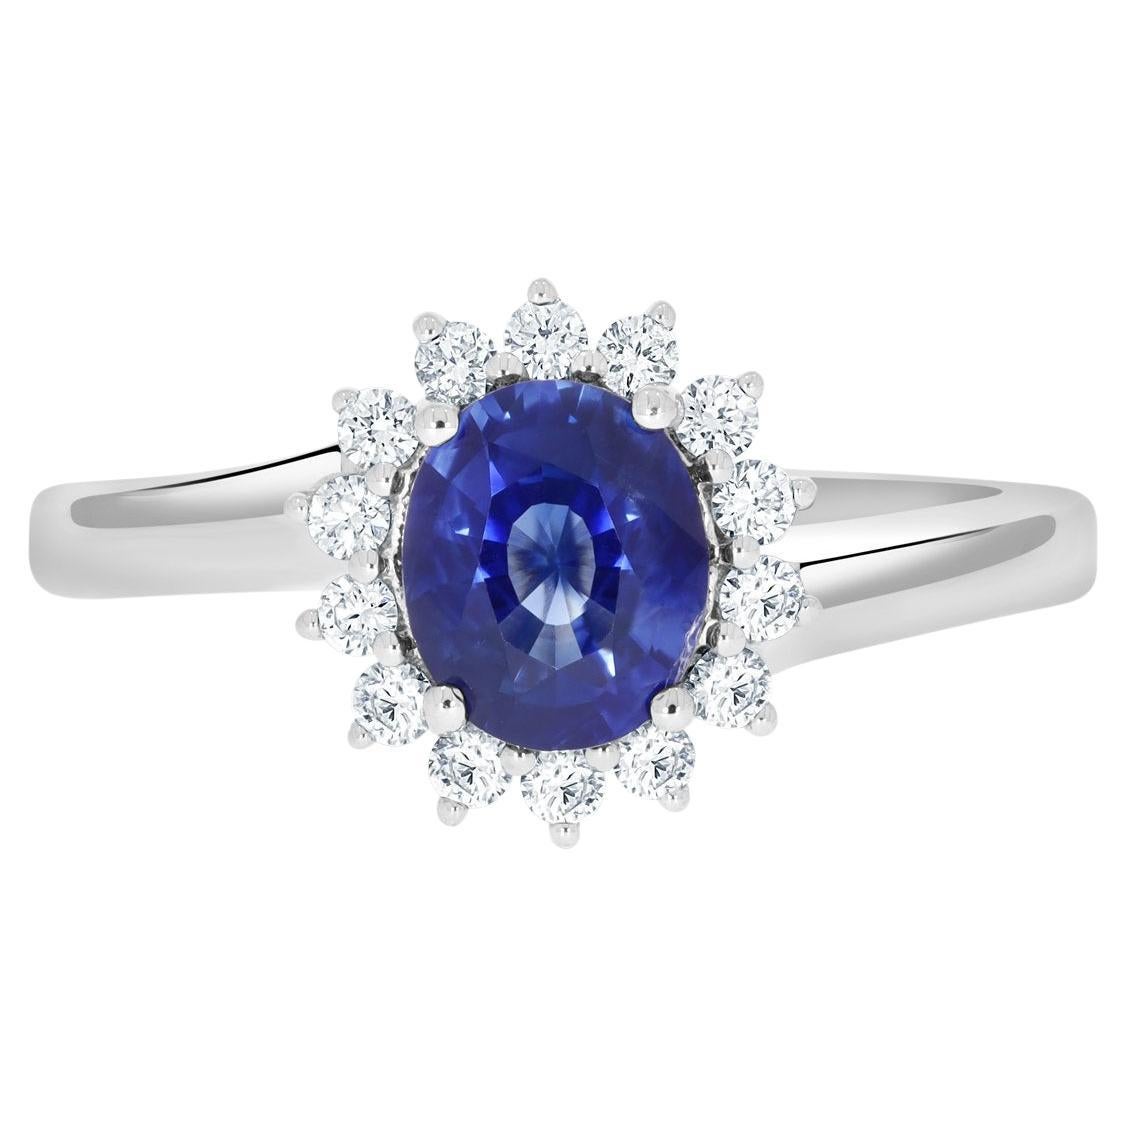 1.16ct Sapphire Ring with 0.23Tct Diamonds Set in 14K White Gold For Sale